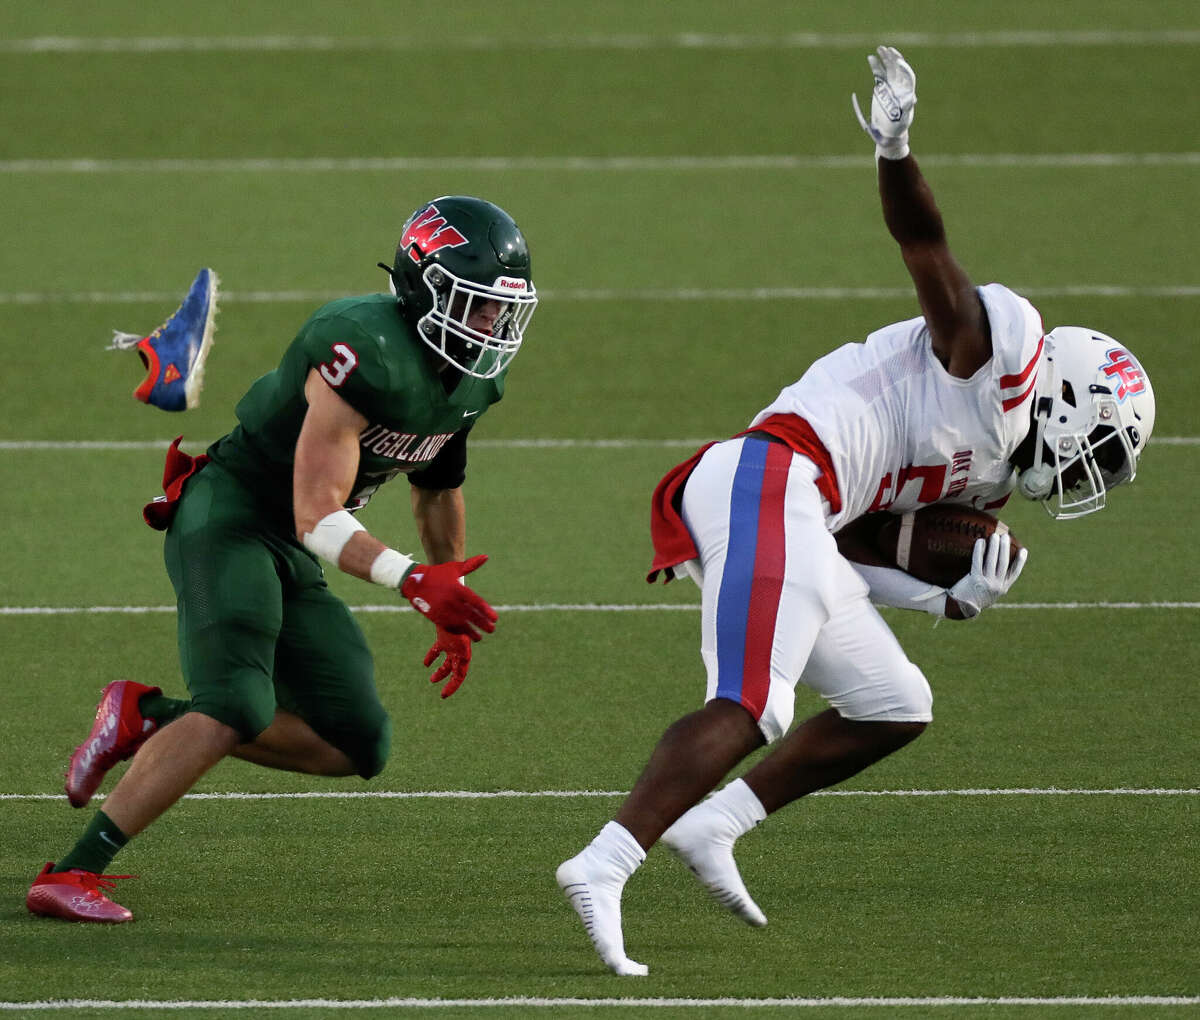 Oak Ridge running back Frankie Arthur (5) loses his shoe after breaking a tackle by The Woodlands linebacker JT Goff (12) in the second quarter of a District 13-6A high school football game at Woodforest Bank Stadium, Thursday, Sept. 8, 2022, in Shenandoah.